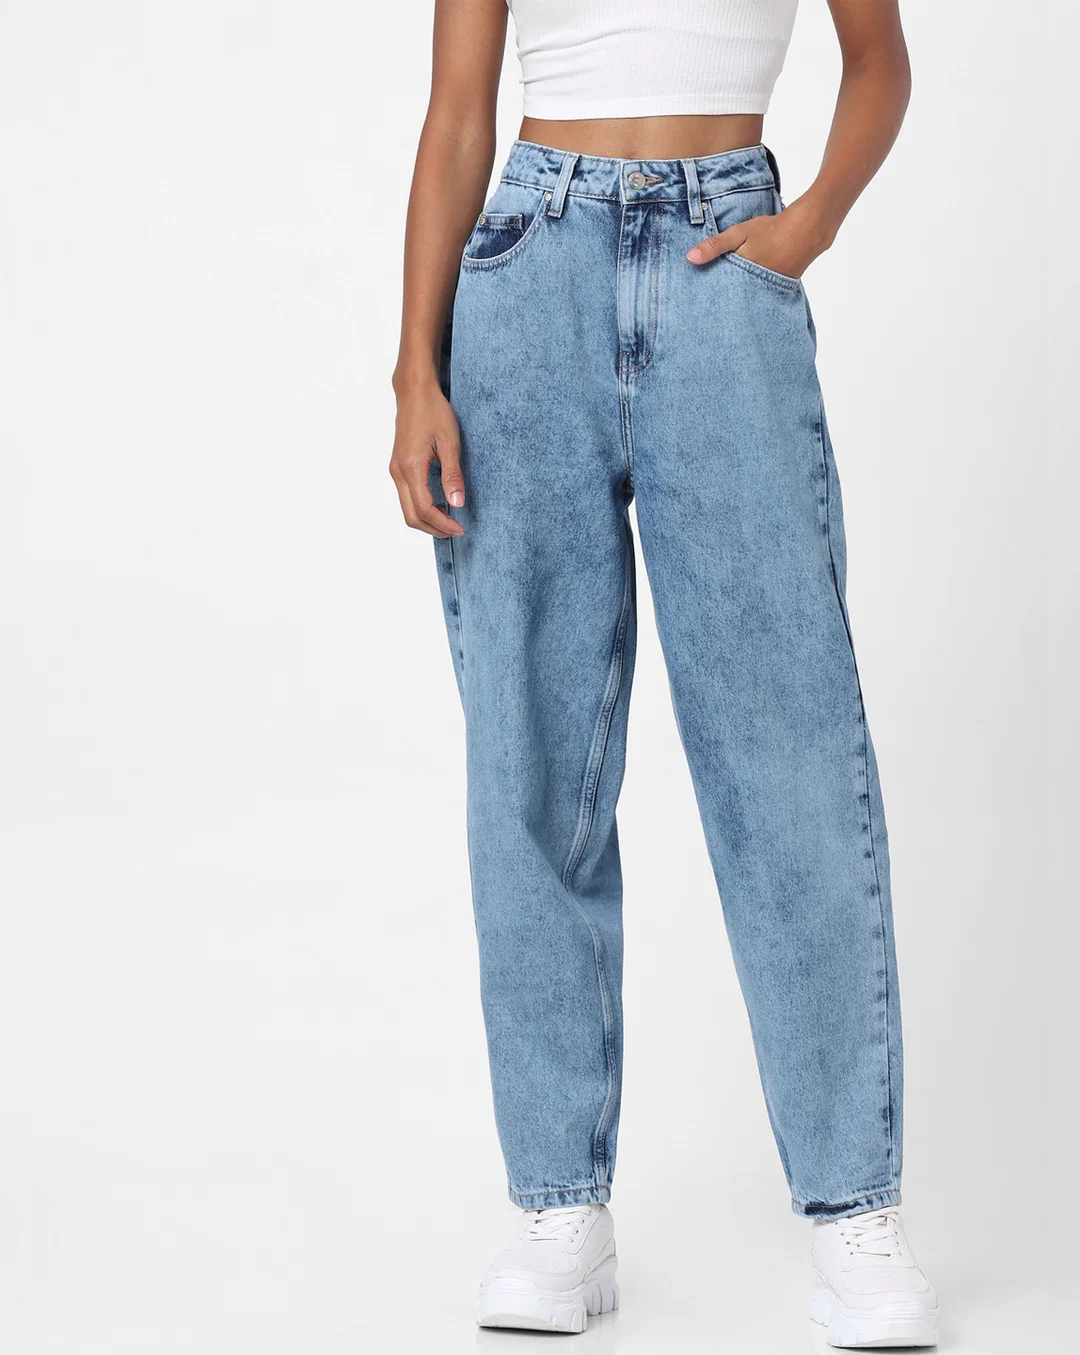 Mom jeans for women have become a popular and beloved fashion trend among women of all ages for several reasons.